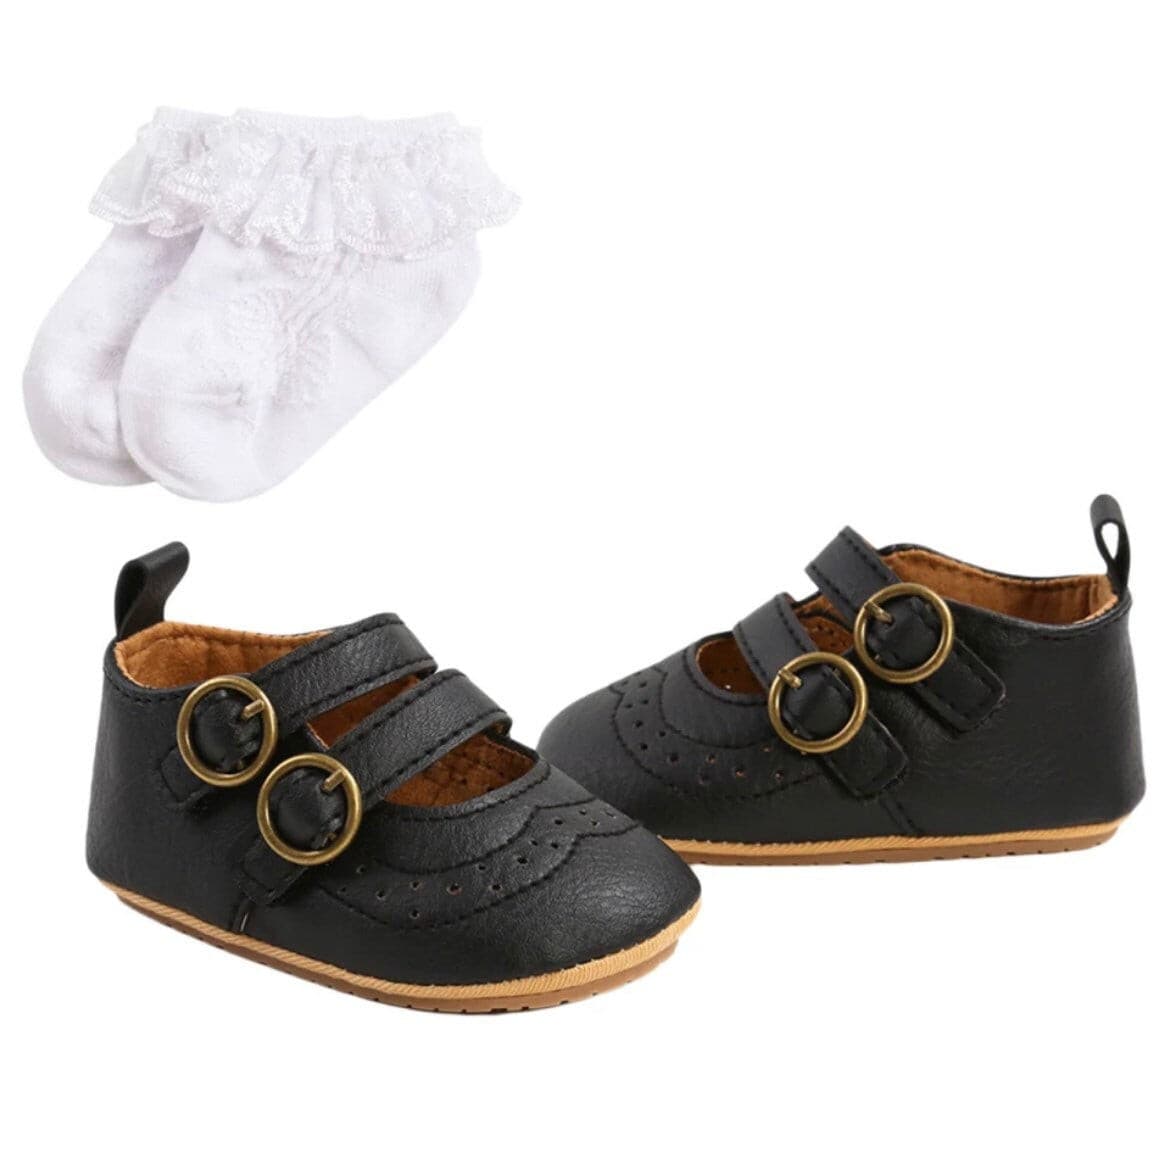 Lou - Baby Mary Janes First Walker Shoes-Thank you for visiting my store! Gorgeous Baby Mary Janes First Walker Shoes in size newborn to 18 months.This is great little shoe and is very popular for all speci-Bijou Bubs